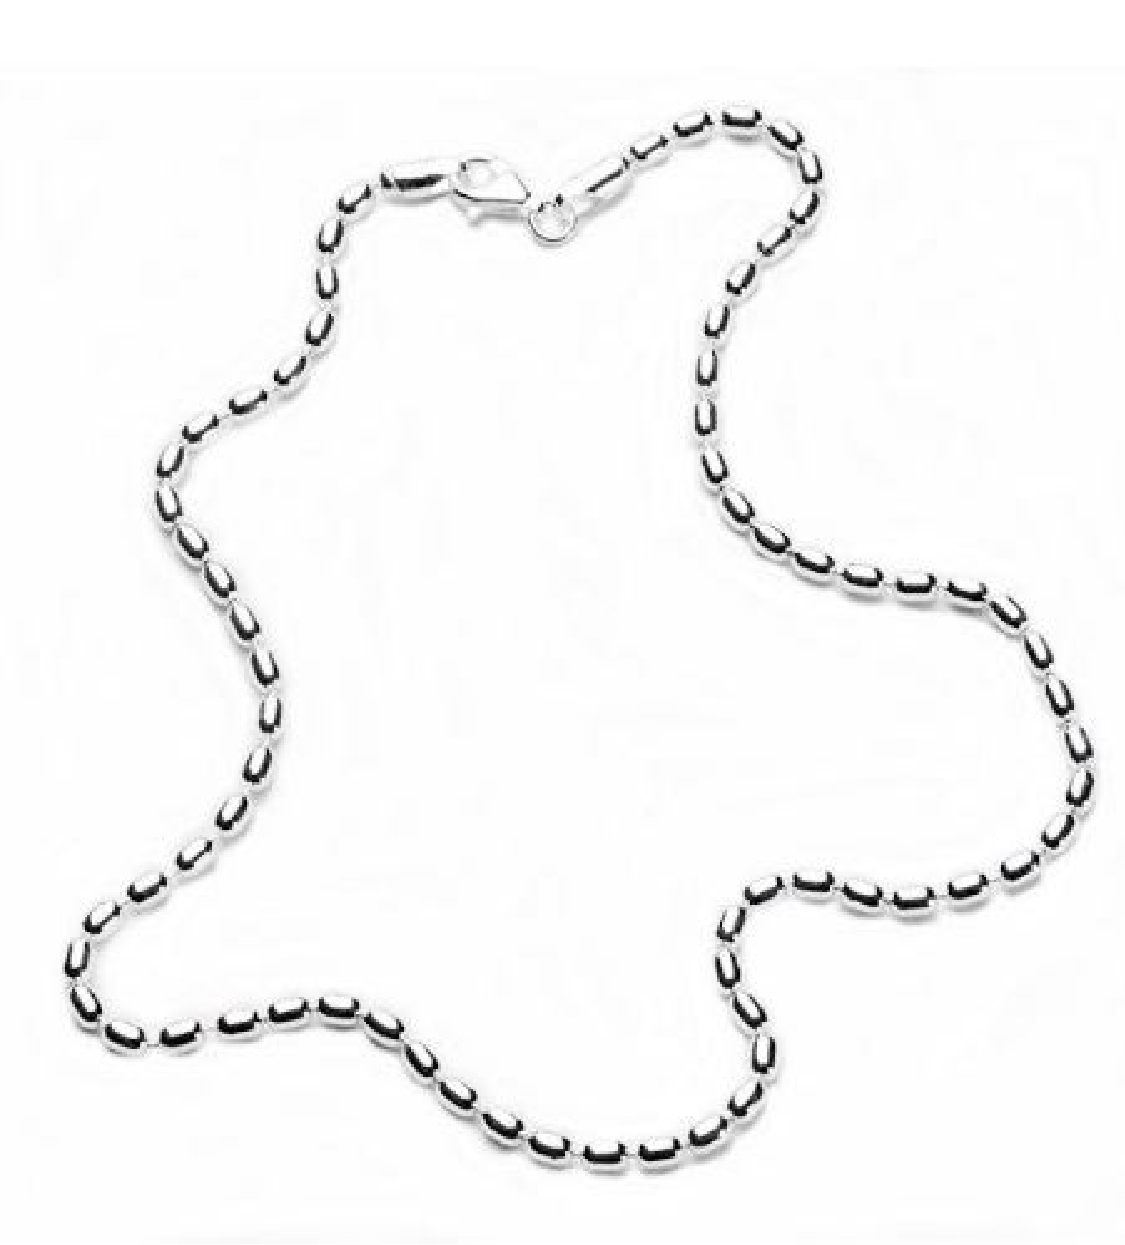 Southern Gates 3mm Sterling Silver Rice Bead Chain
KAR511/18+2